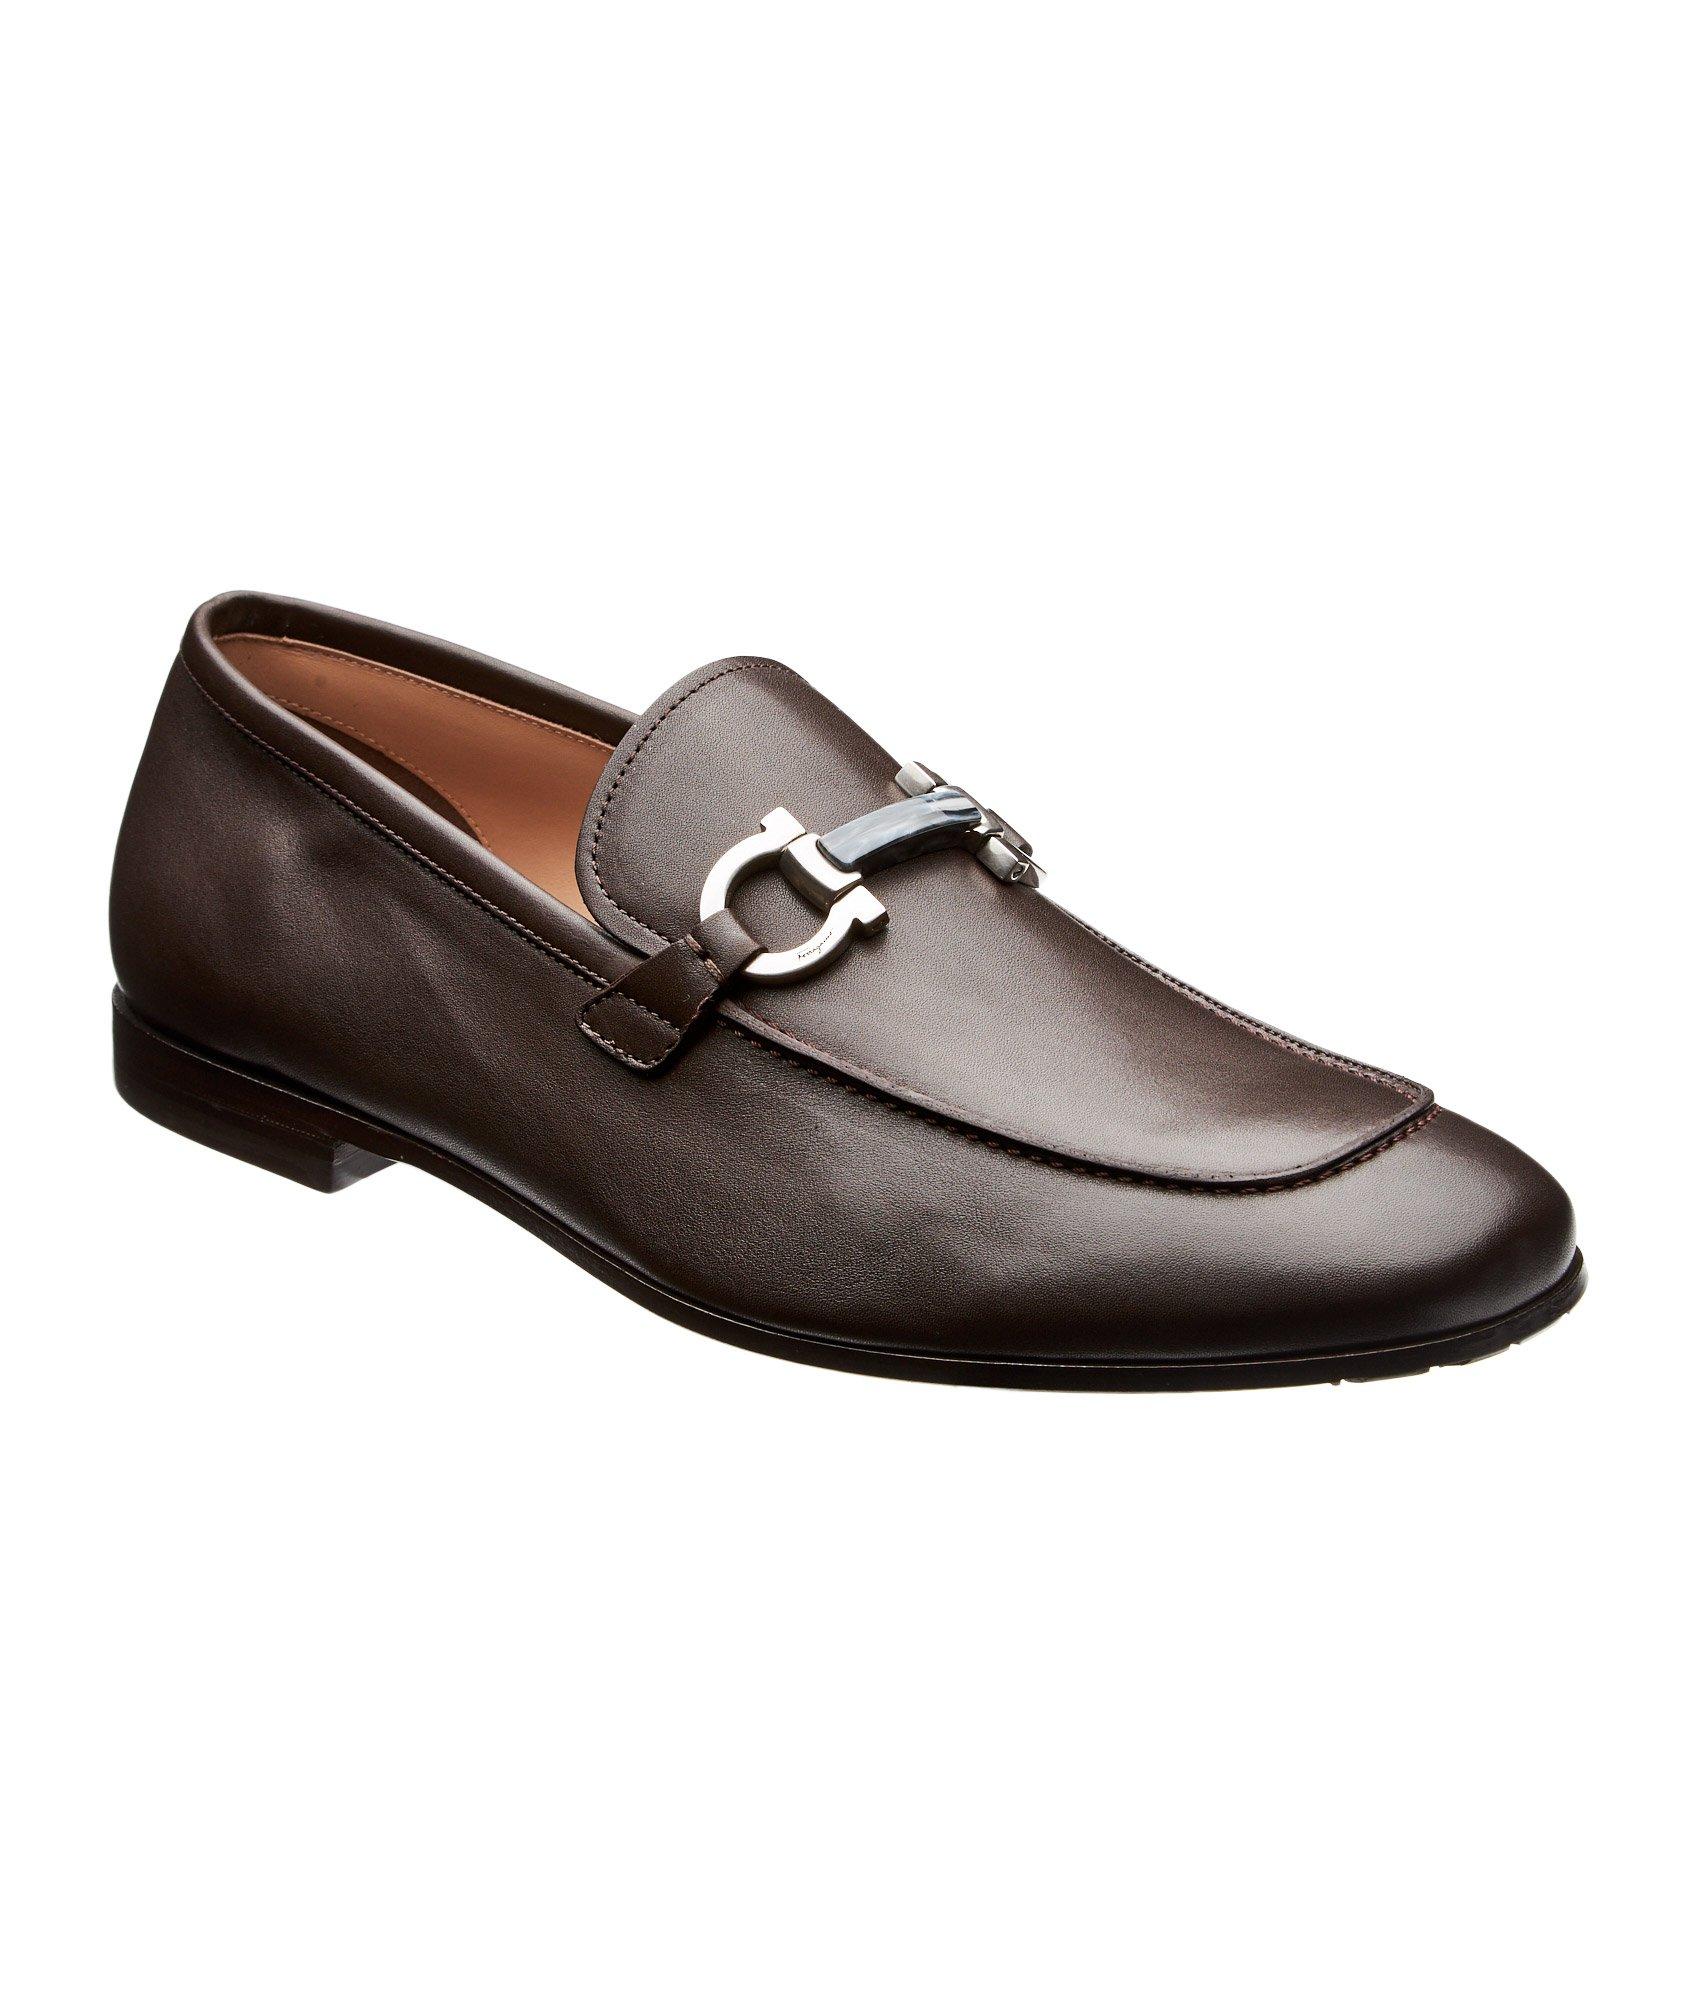 Calfskin Loafers image 0